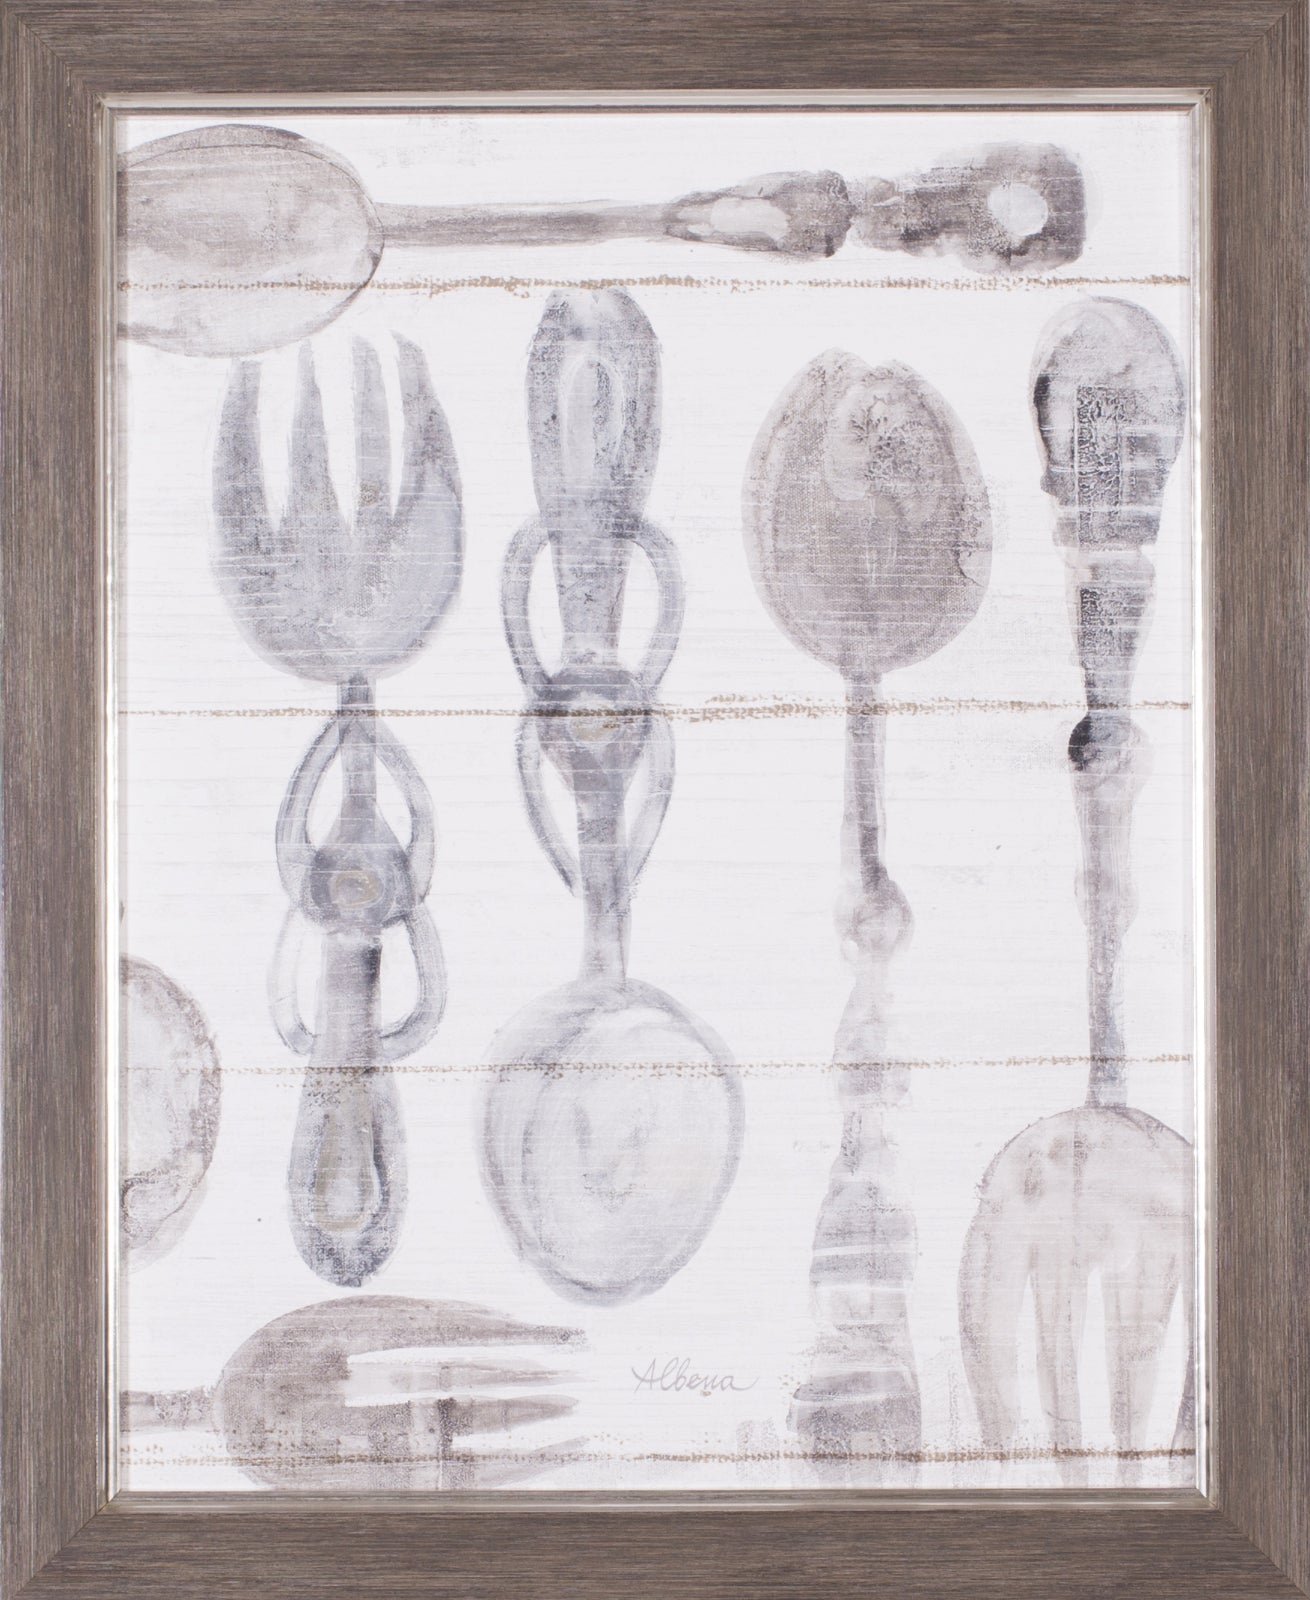 Art Effects Spoons and Forks Neutral III Wall Art by Albena Hristova